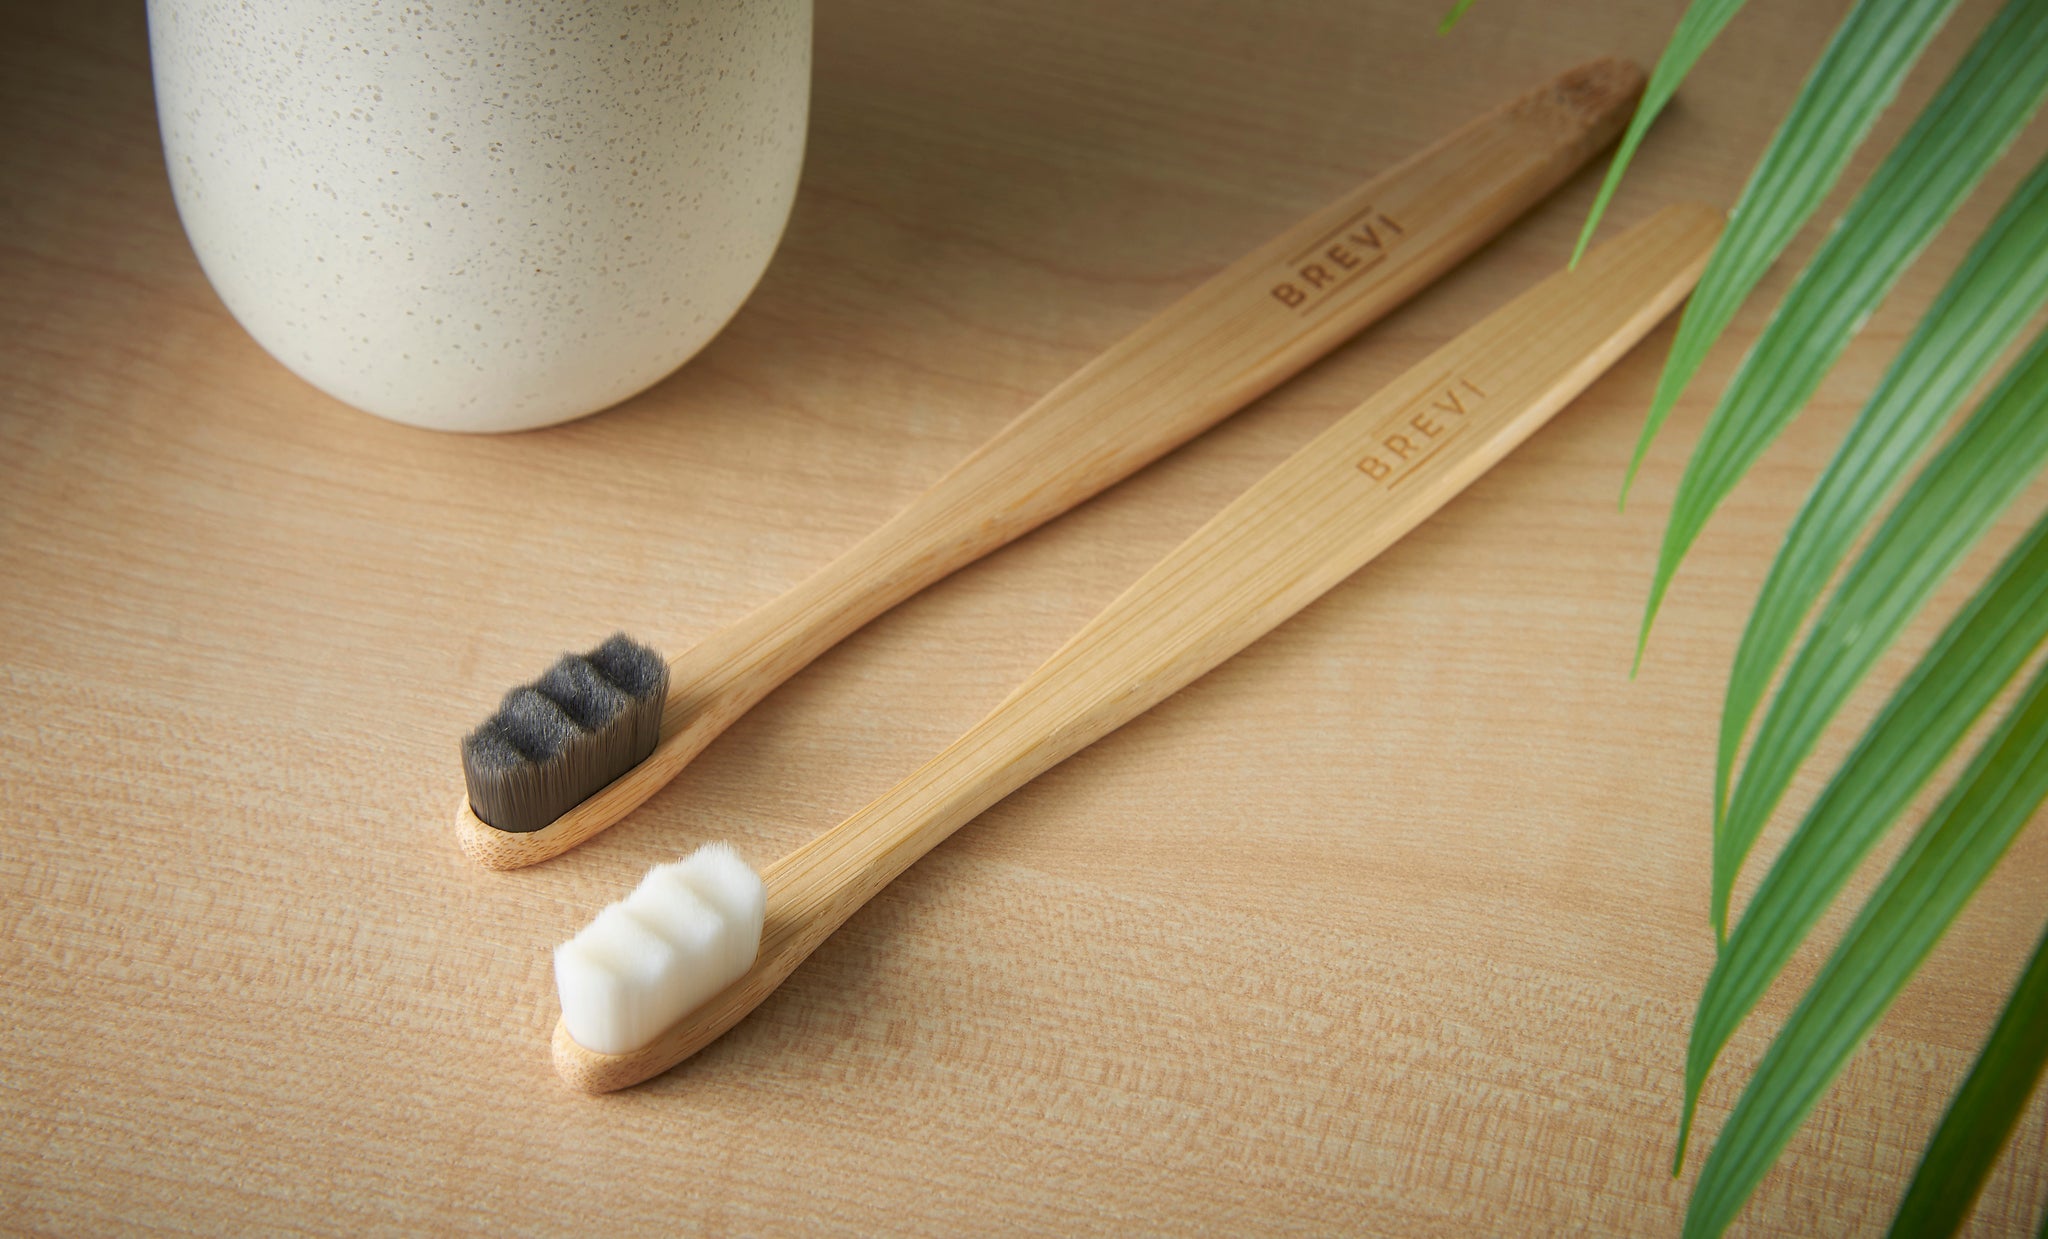 BREVI™ Nordic-Inspired Premium Nano Toothbrush - Buy More and Save 60% Labour Day